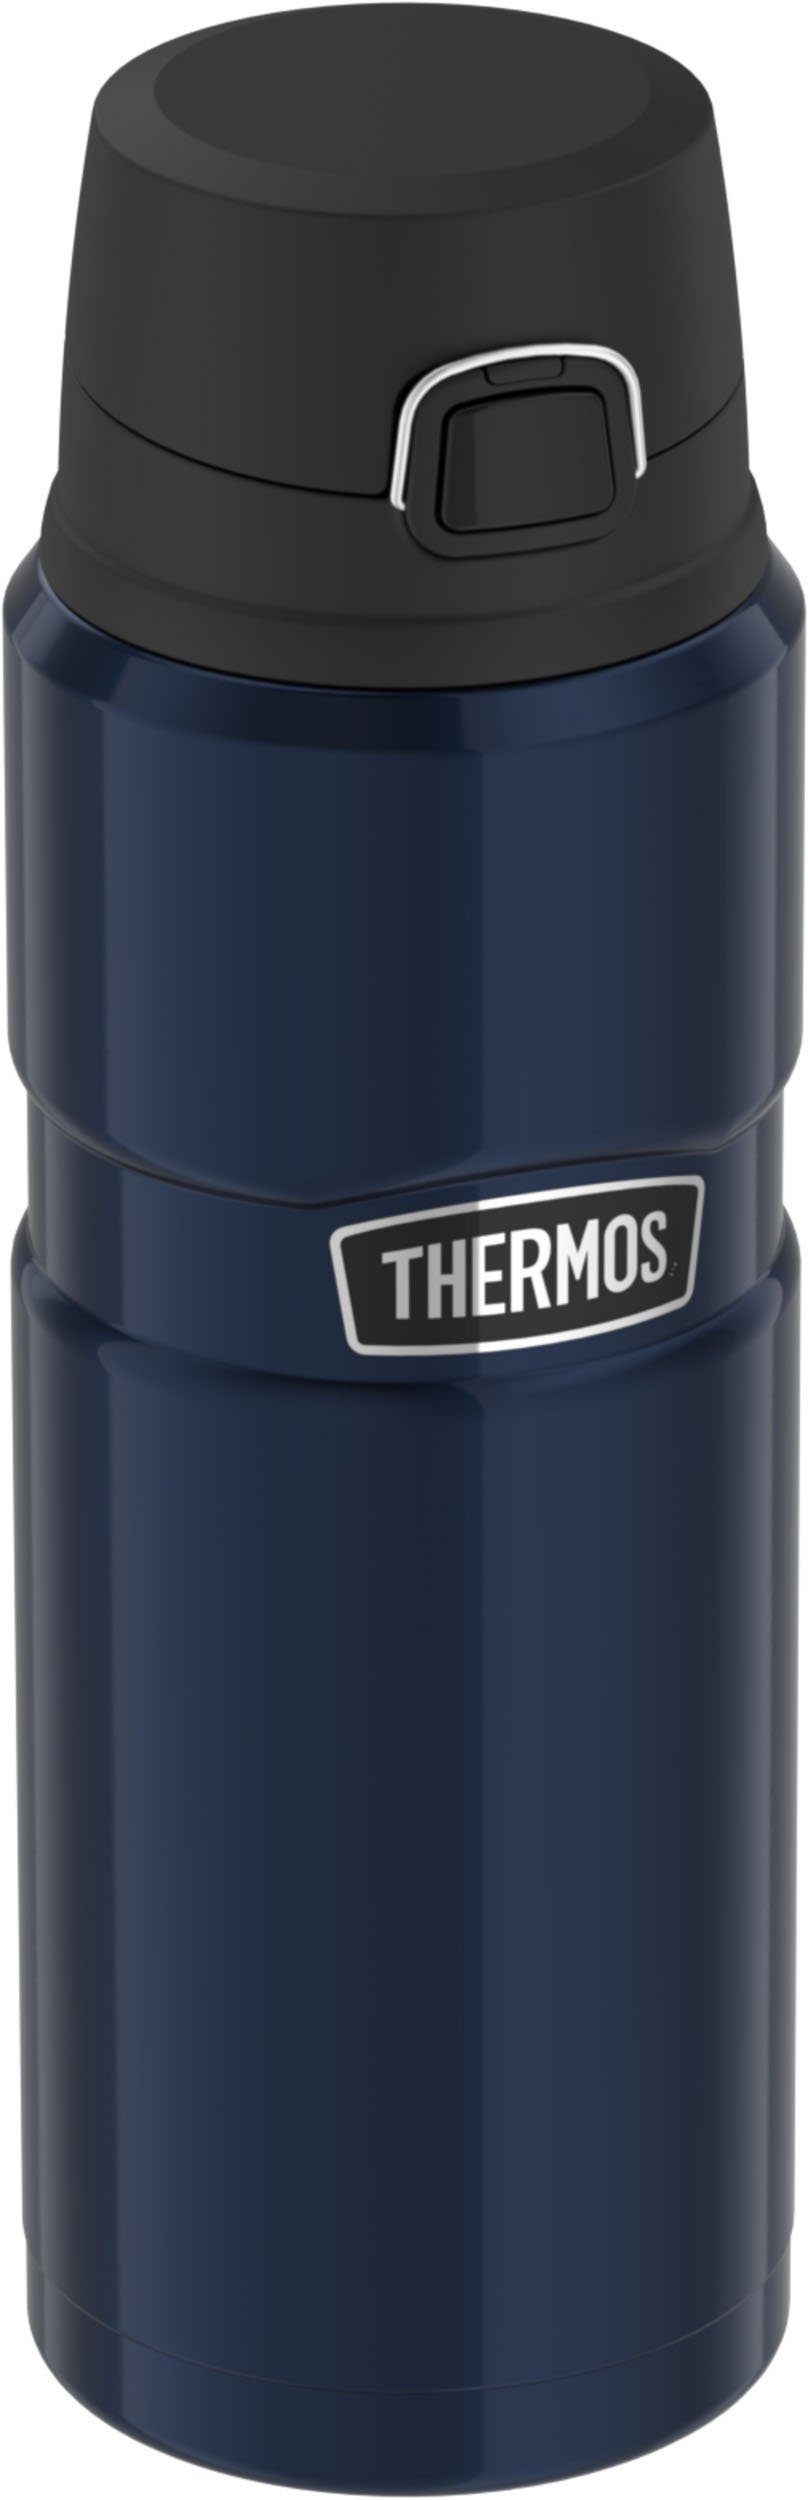 King, THERMOS blau 0,7 Stainless Liter Thermoflasche Edelstahl,